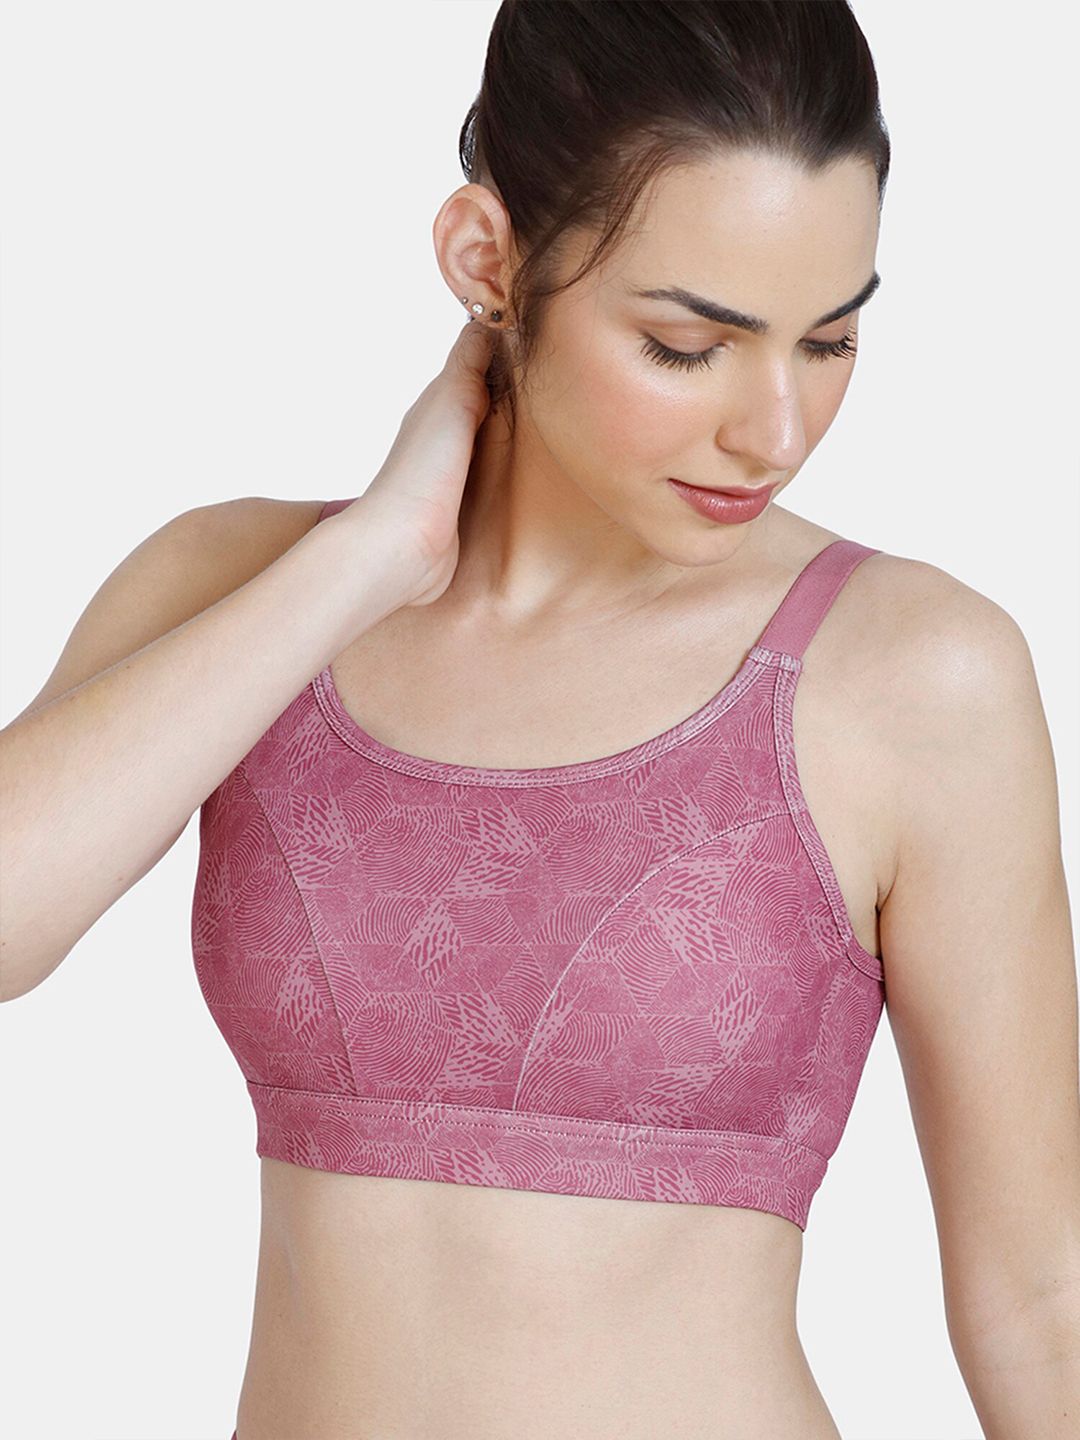 Zelocity by Zivame Pink Sports Bra - Non Wired Full Coverage Price in India